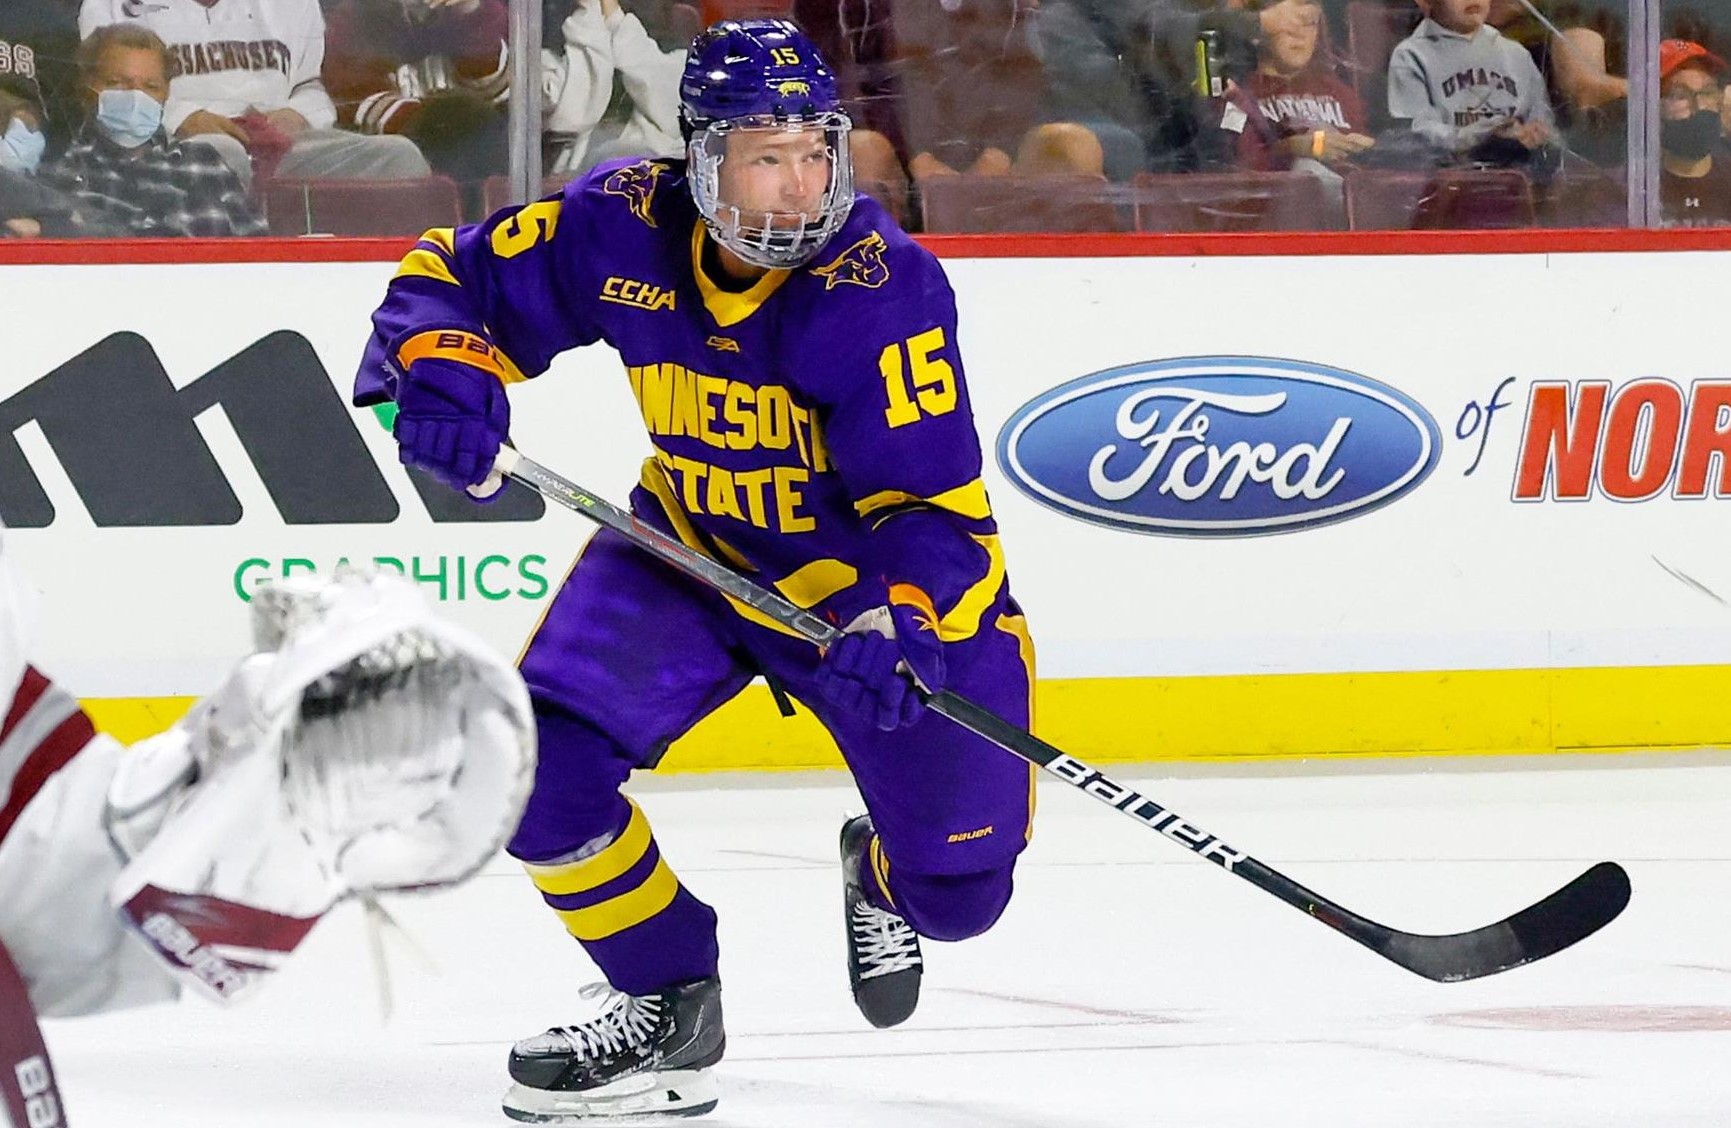 Msu Hockey Schedule 2022 This Week In Ccha Hockey: Minnesota State Finding Way Through Tough  Early-Season Schedule With Nationally-Ranked Teams - College Hockey |  Uscho.com